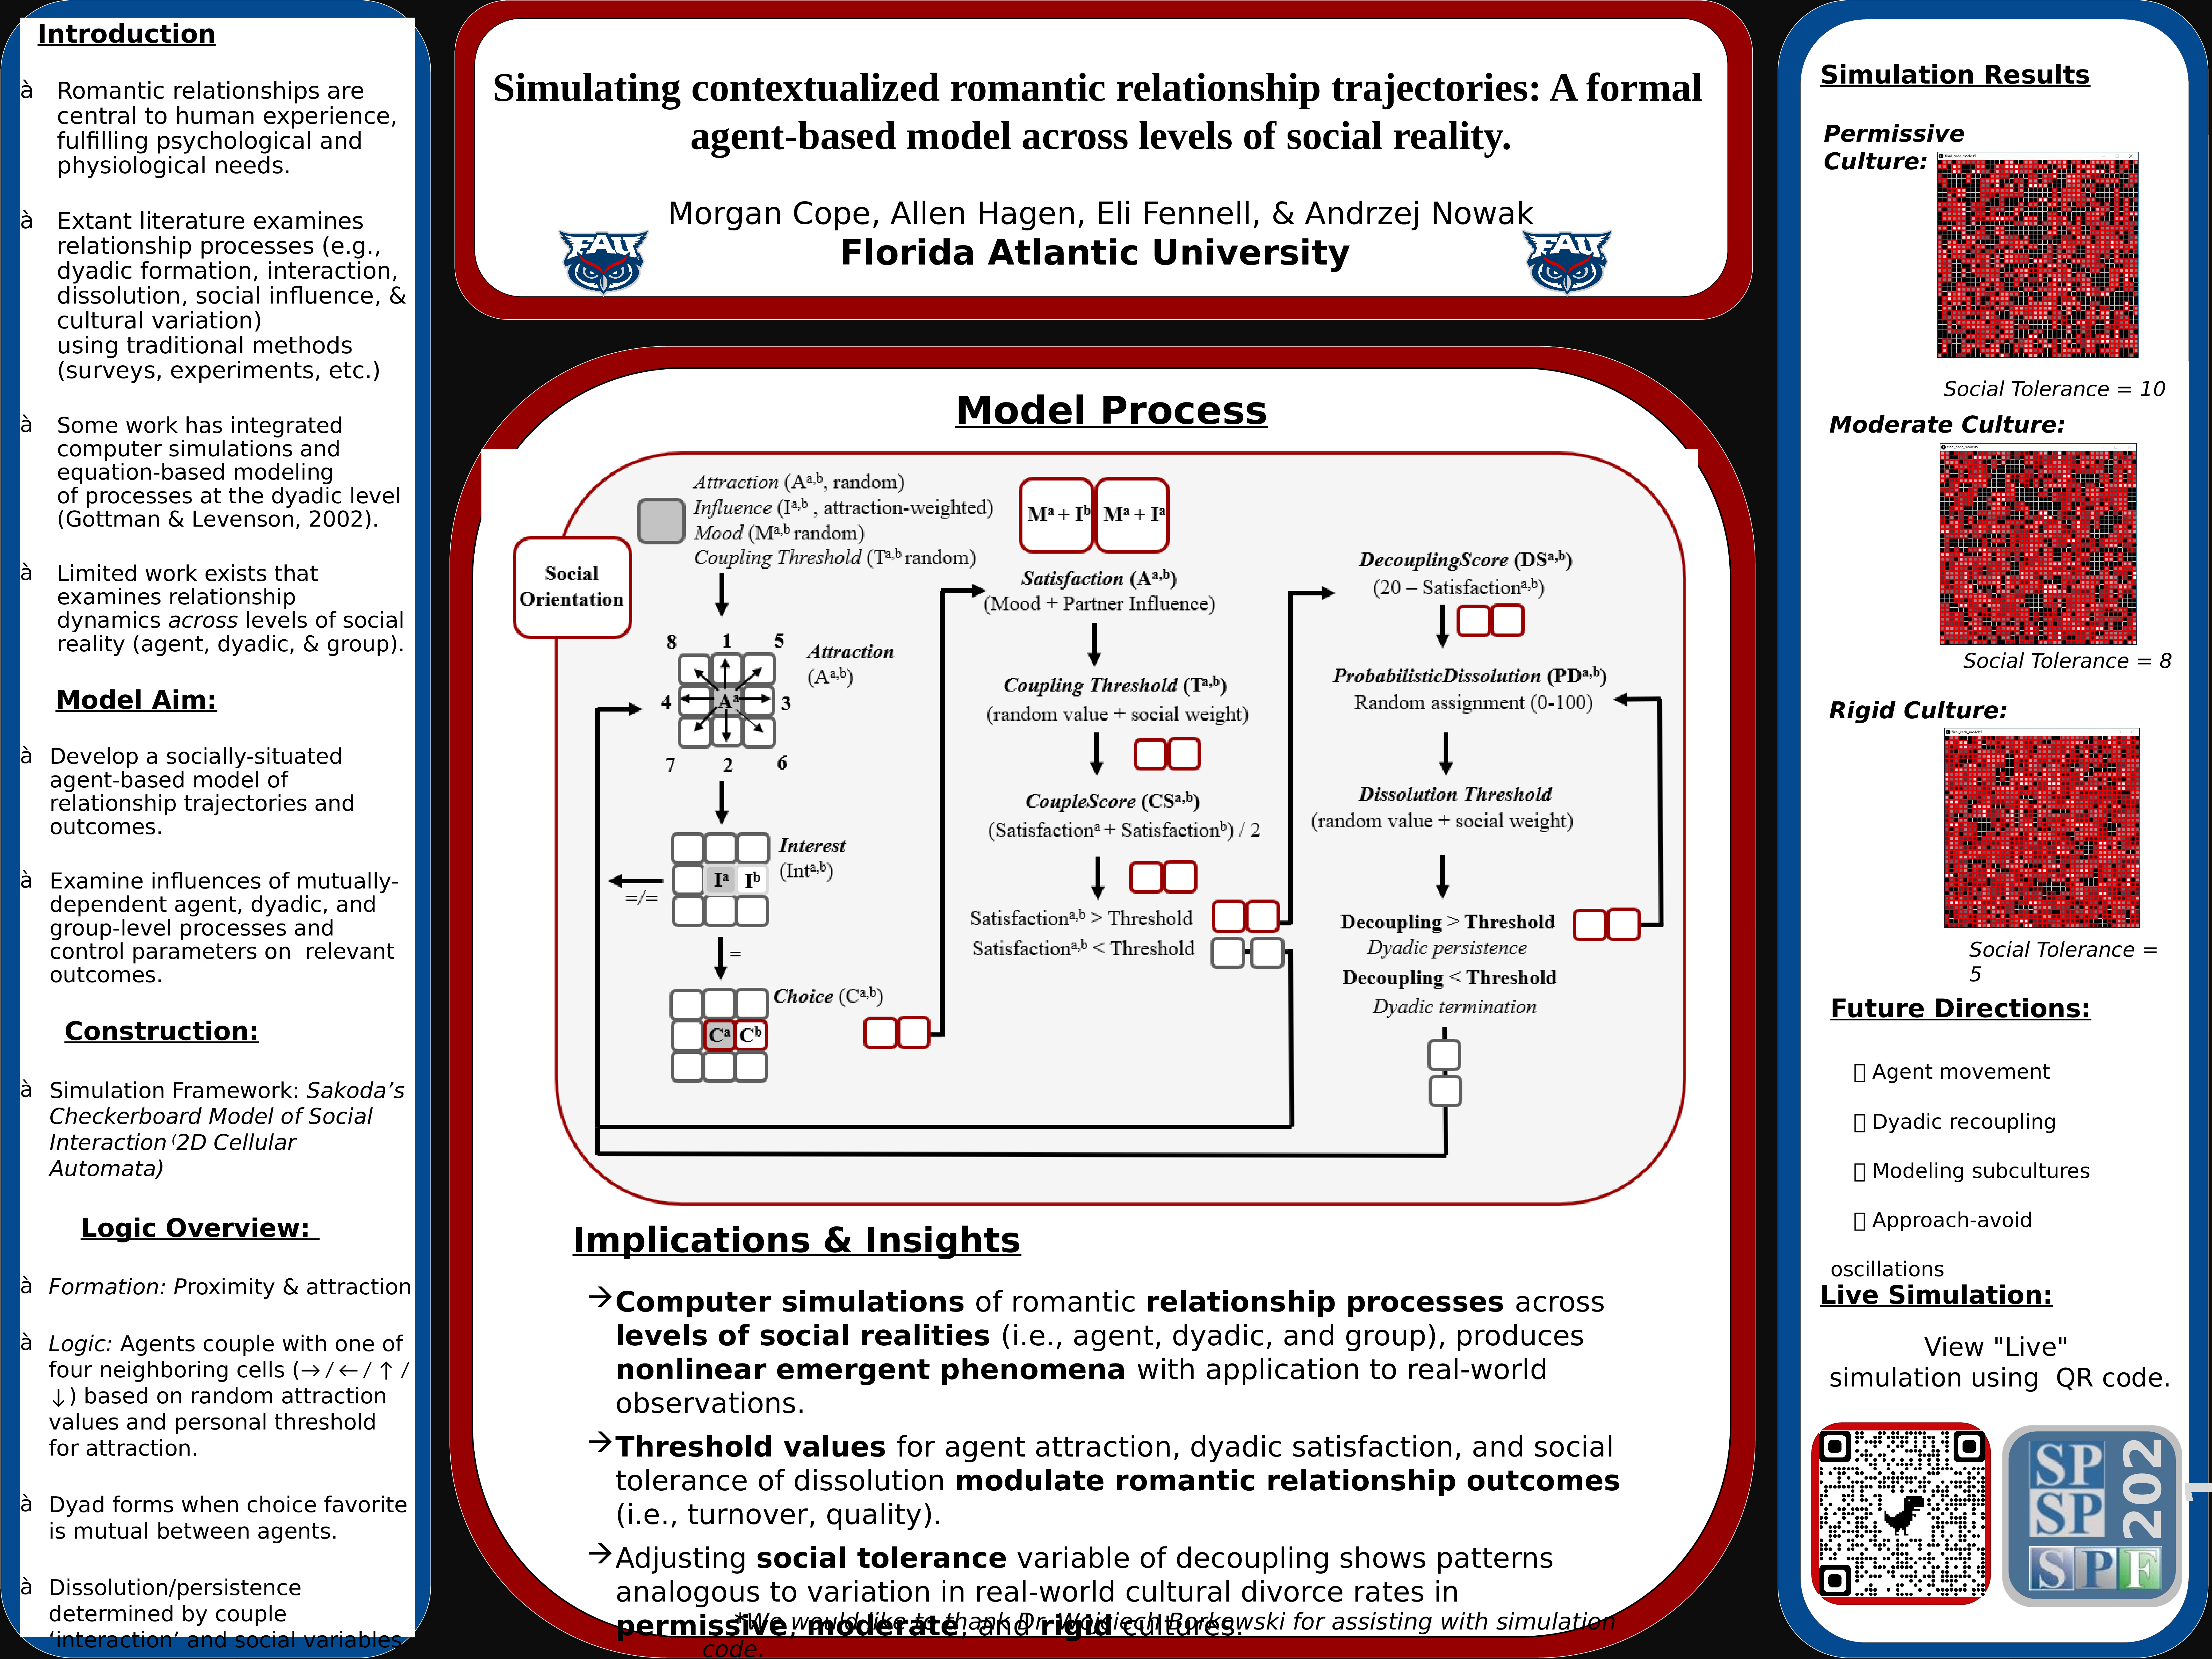 Simulating Contextualized Romantic Relationship Trajectories: A Formal Agent-Based Model Across Levels of Social Reality. Society for Personality and Social Psychology 2021 Summer Psychology Forum. Morgan A. Cope, Allen Hagen, Eli Fennell, & Andrzej Nowak